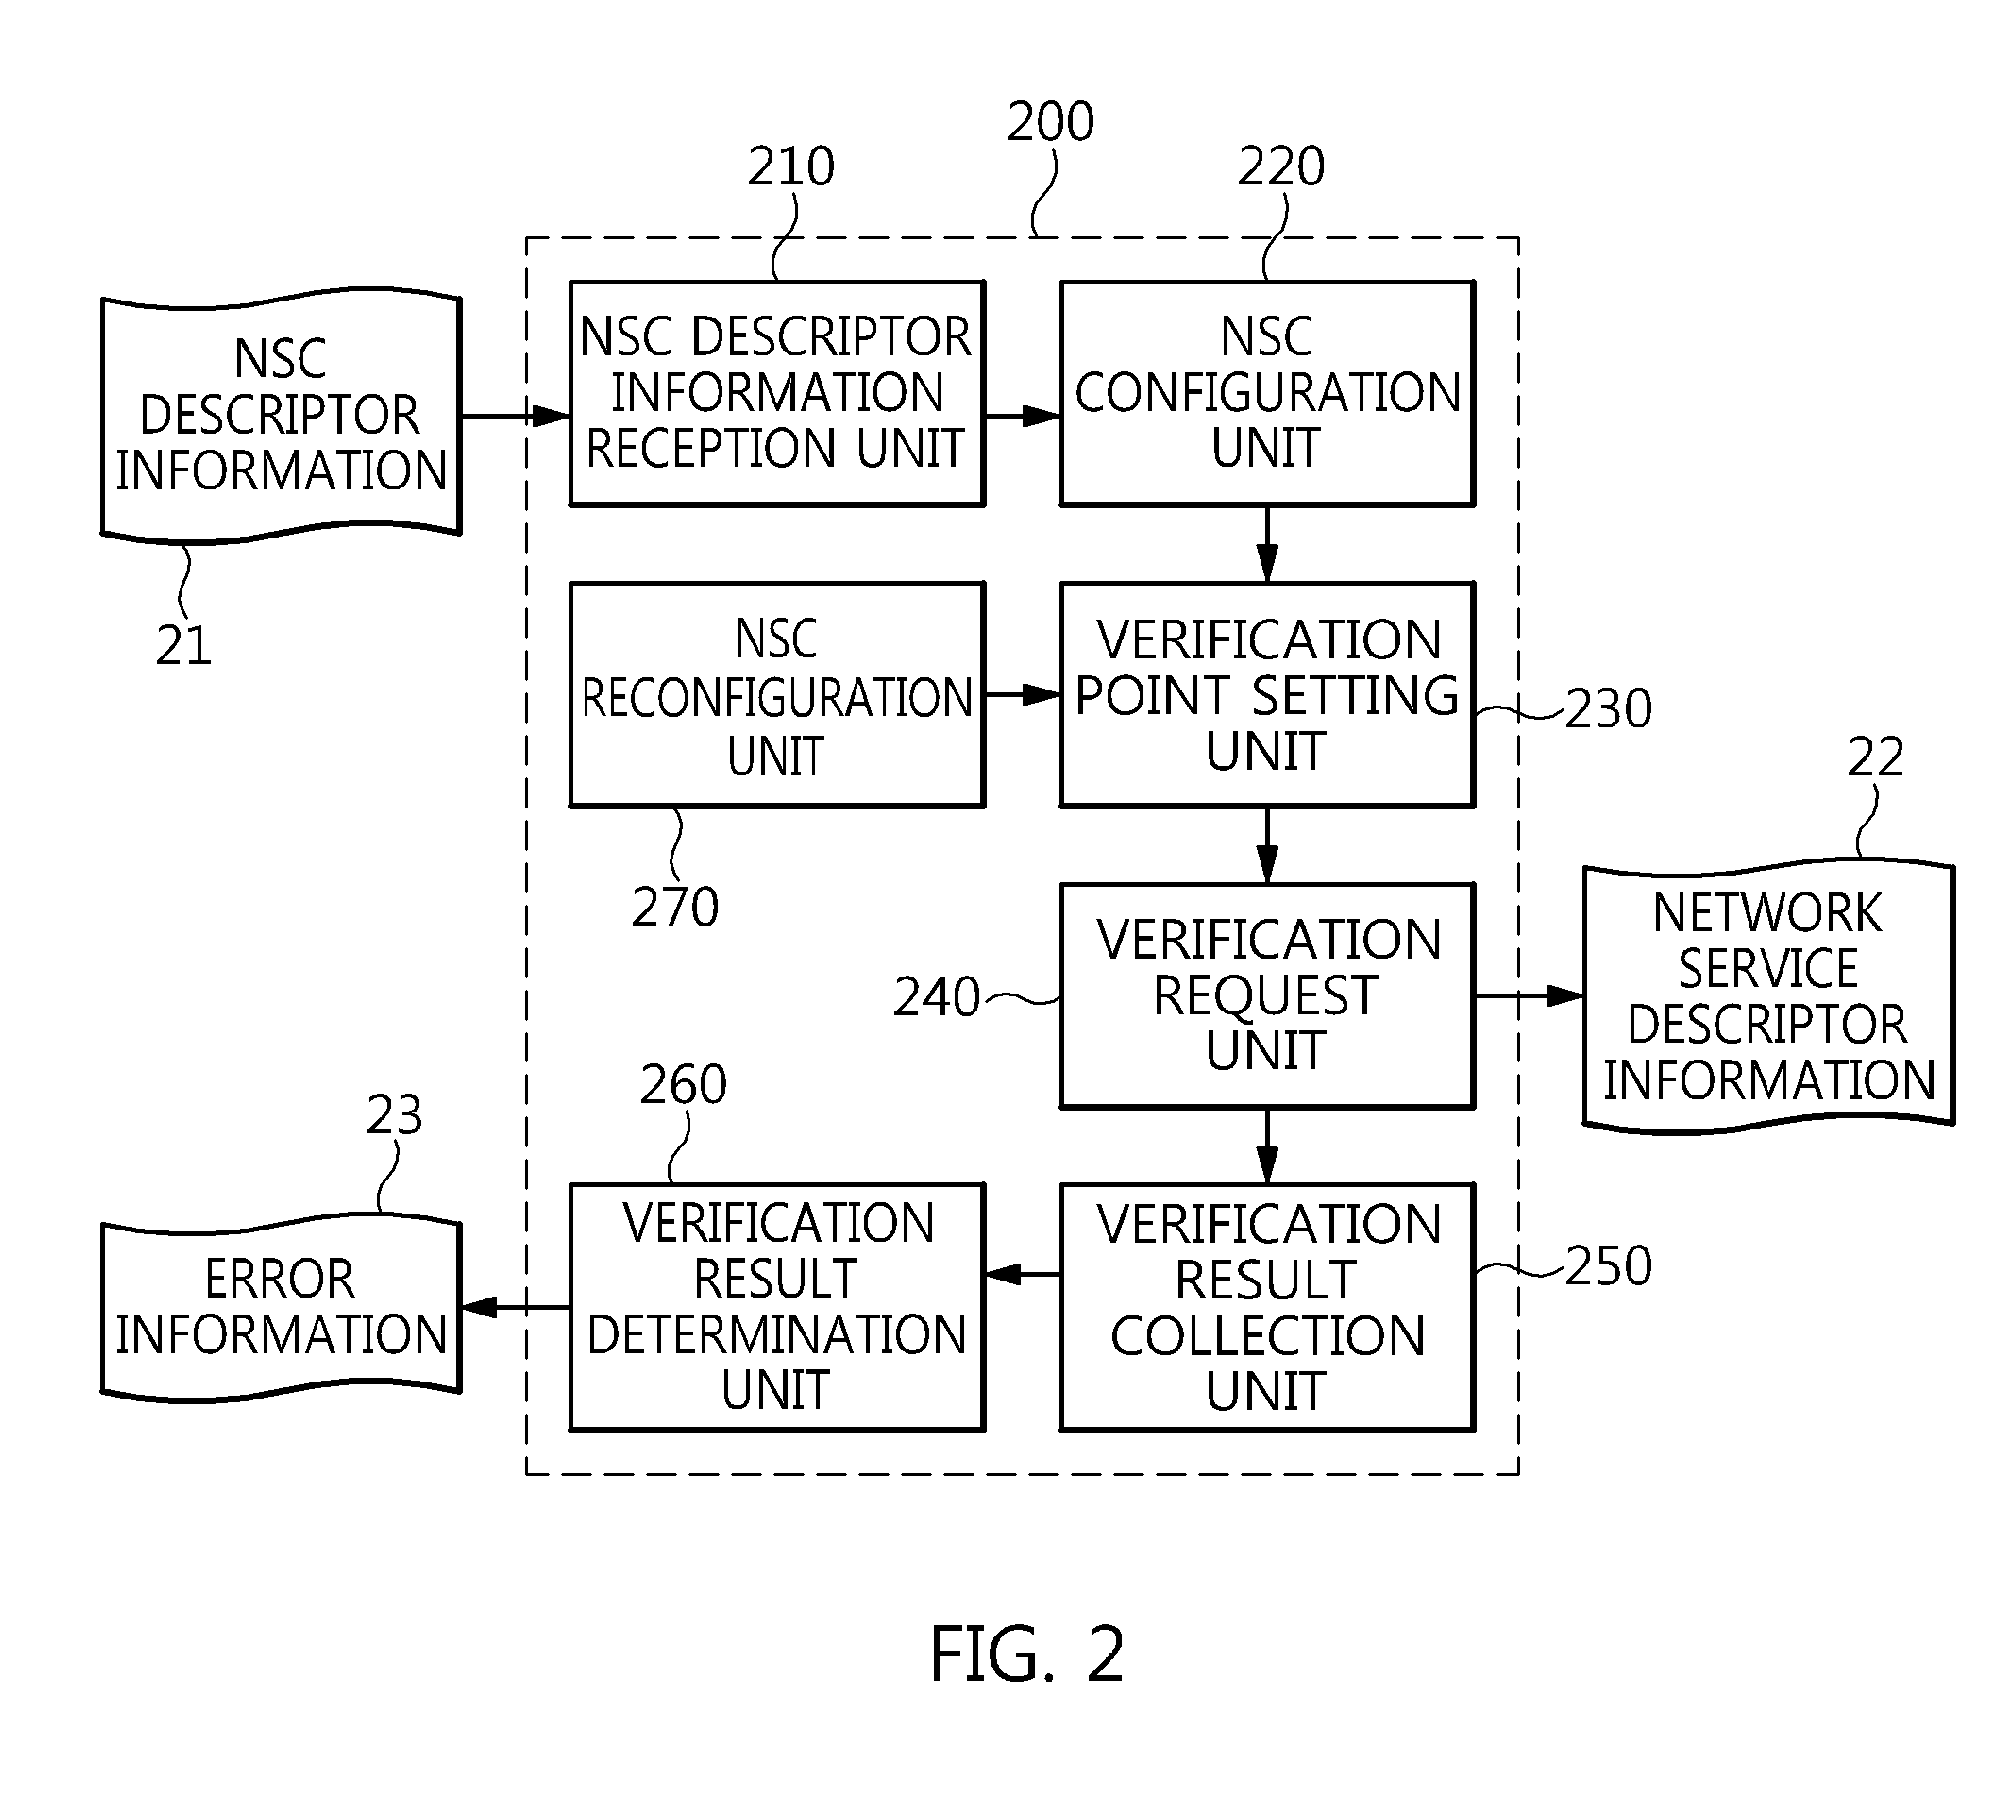 Verification support apparatus and method for formal verification of network service chain in software-defined networking environment, and formal verification apparatus having verification support apparatus